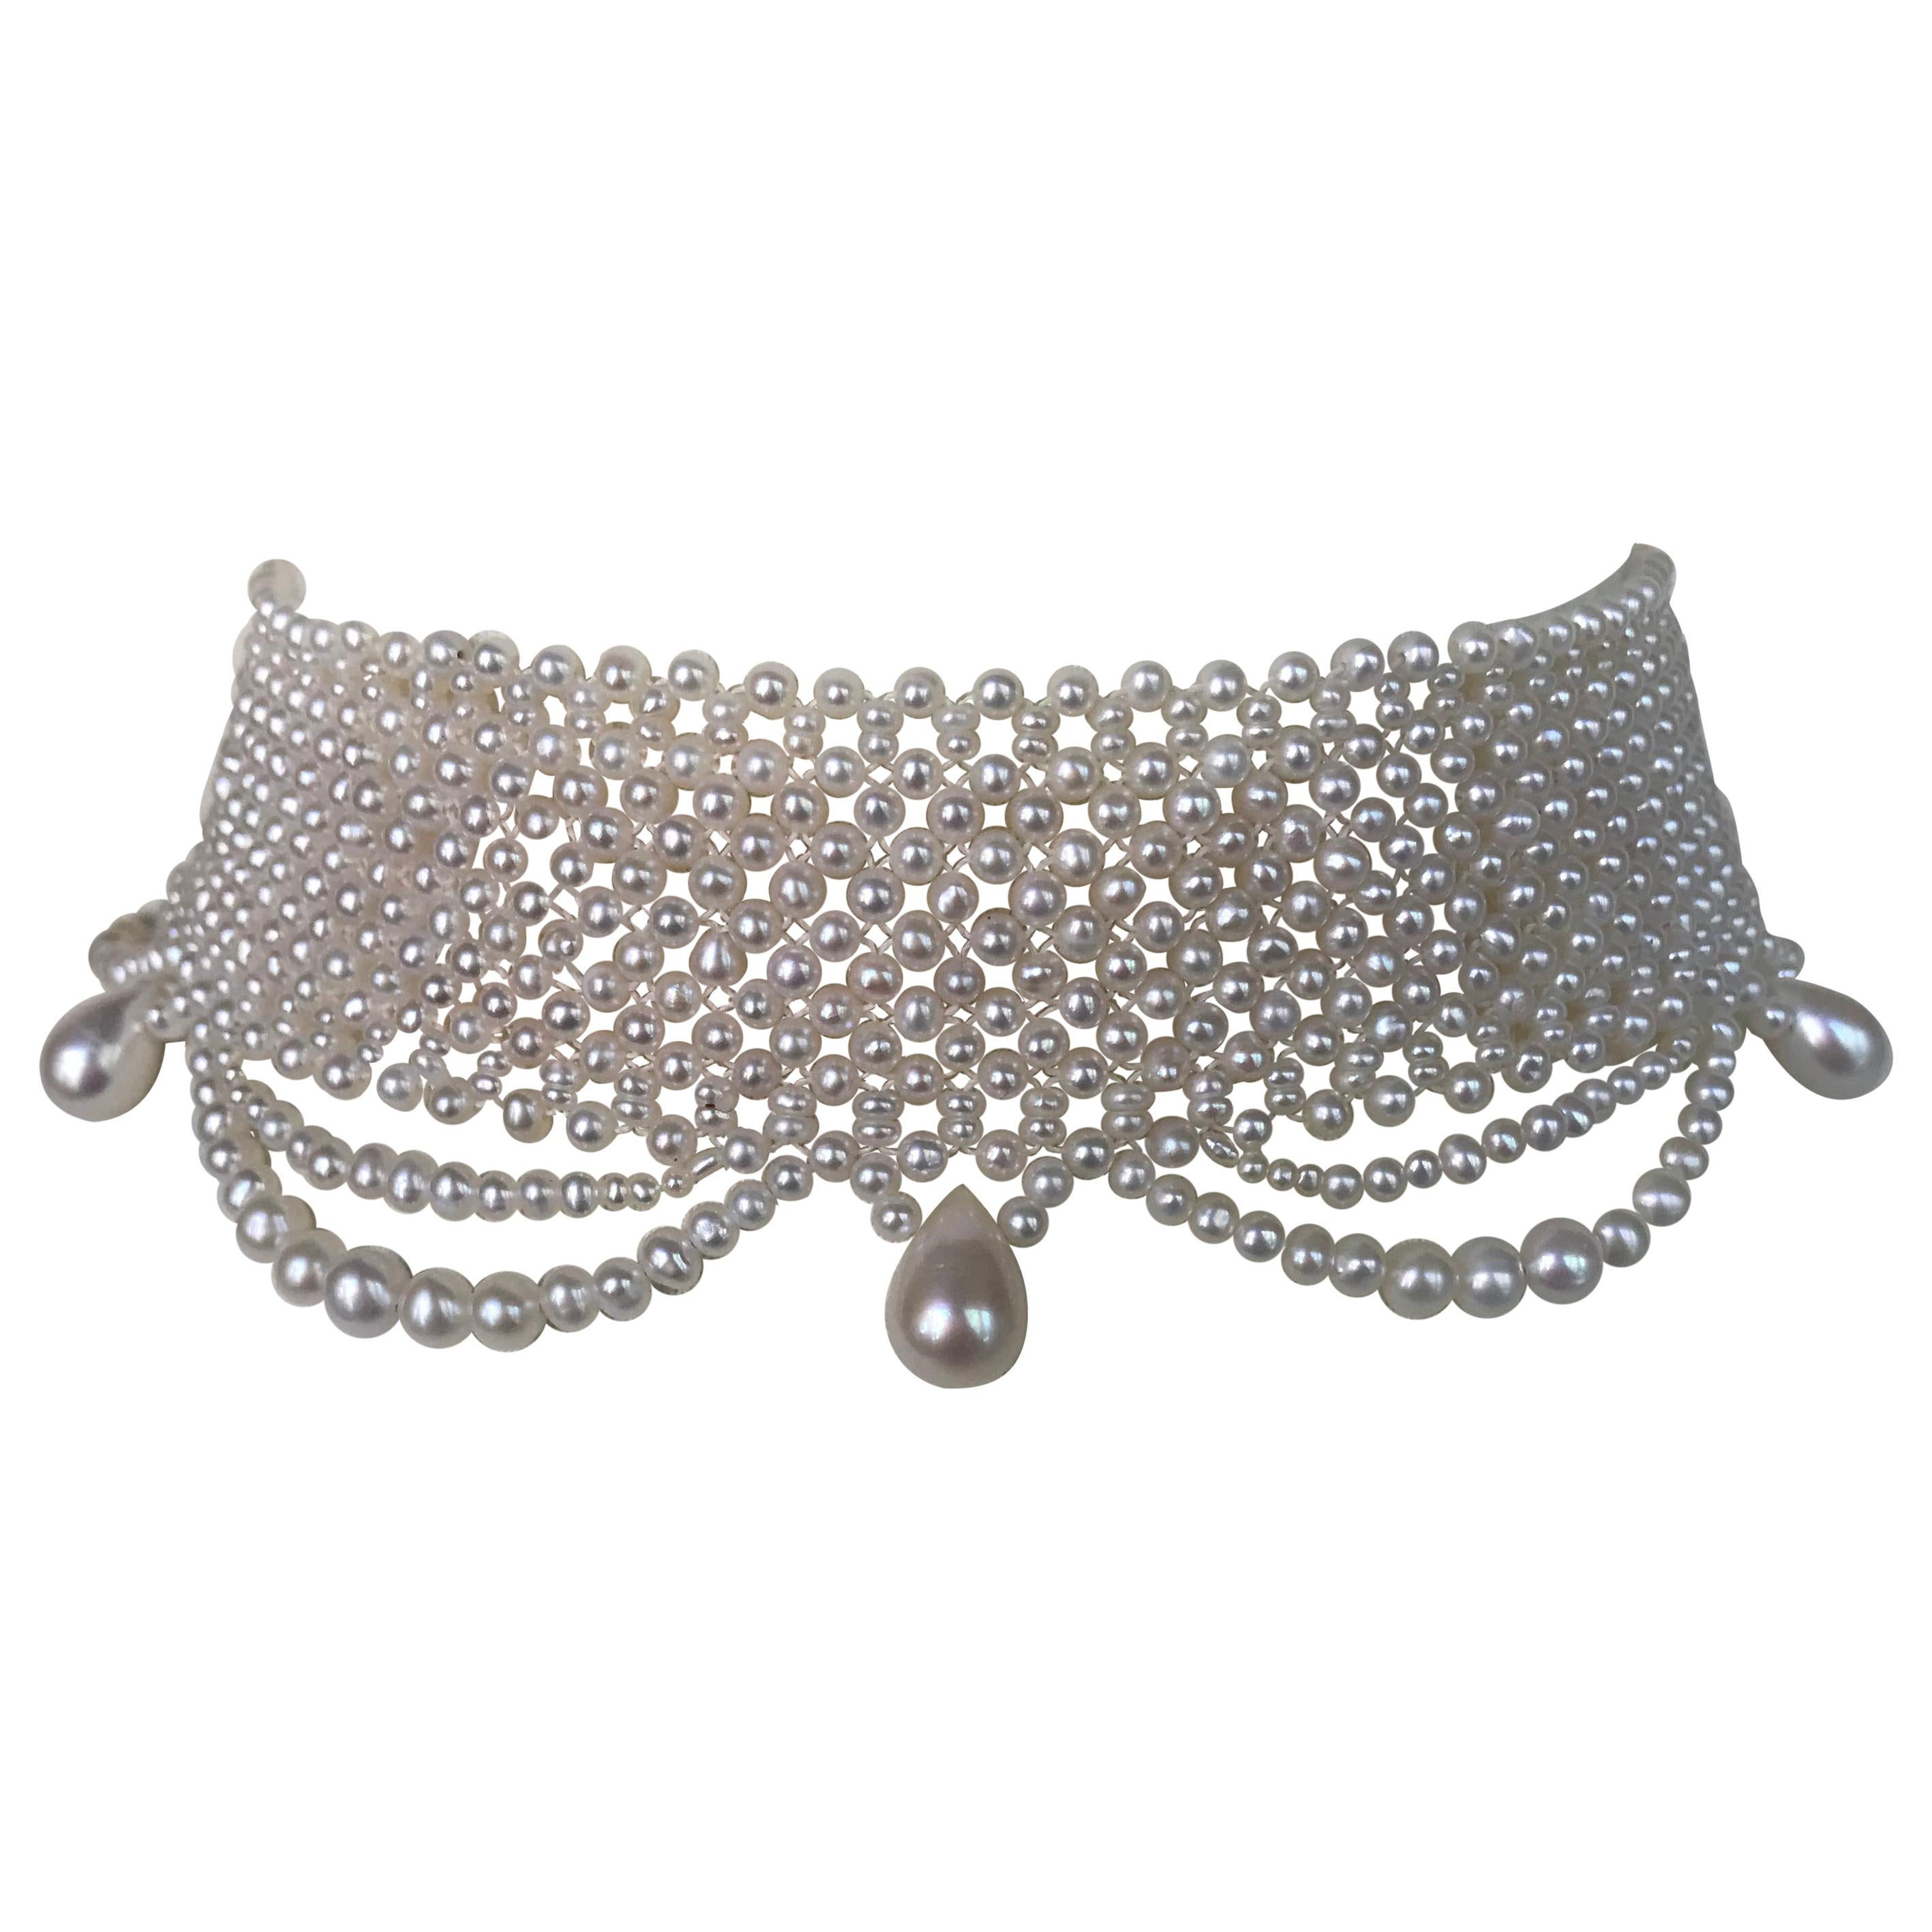 Marina J. Woven Pearl Draped Choker with Pearl drops and secure sliding clasp